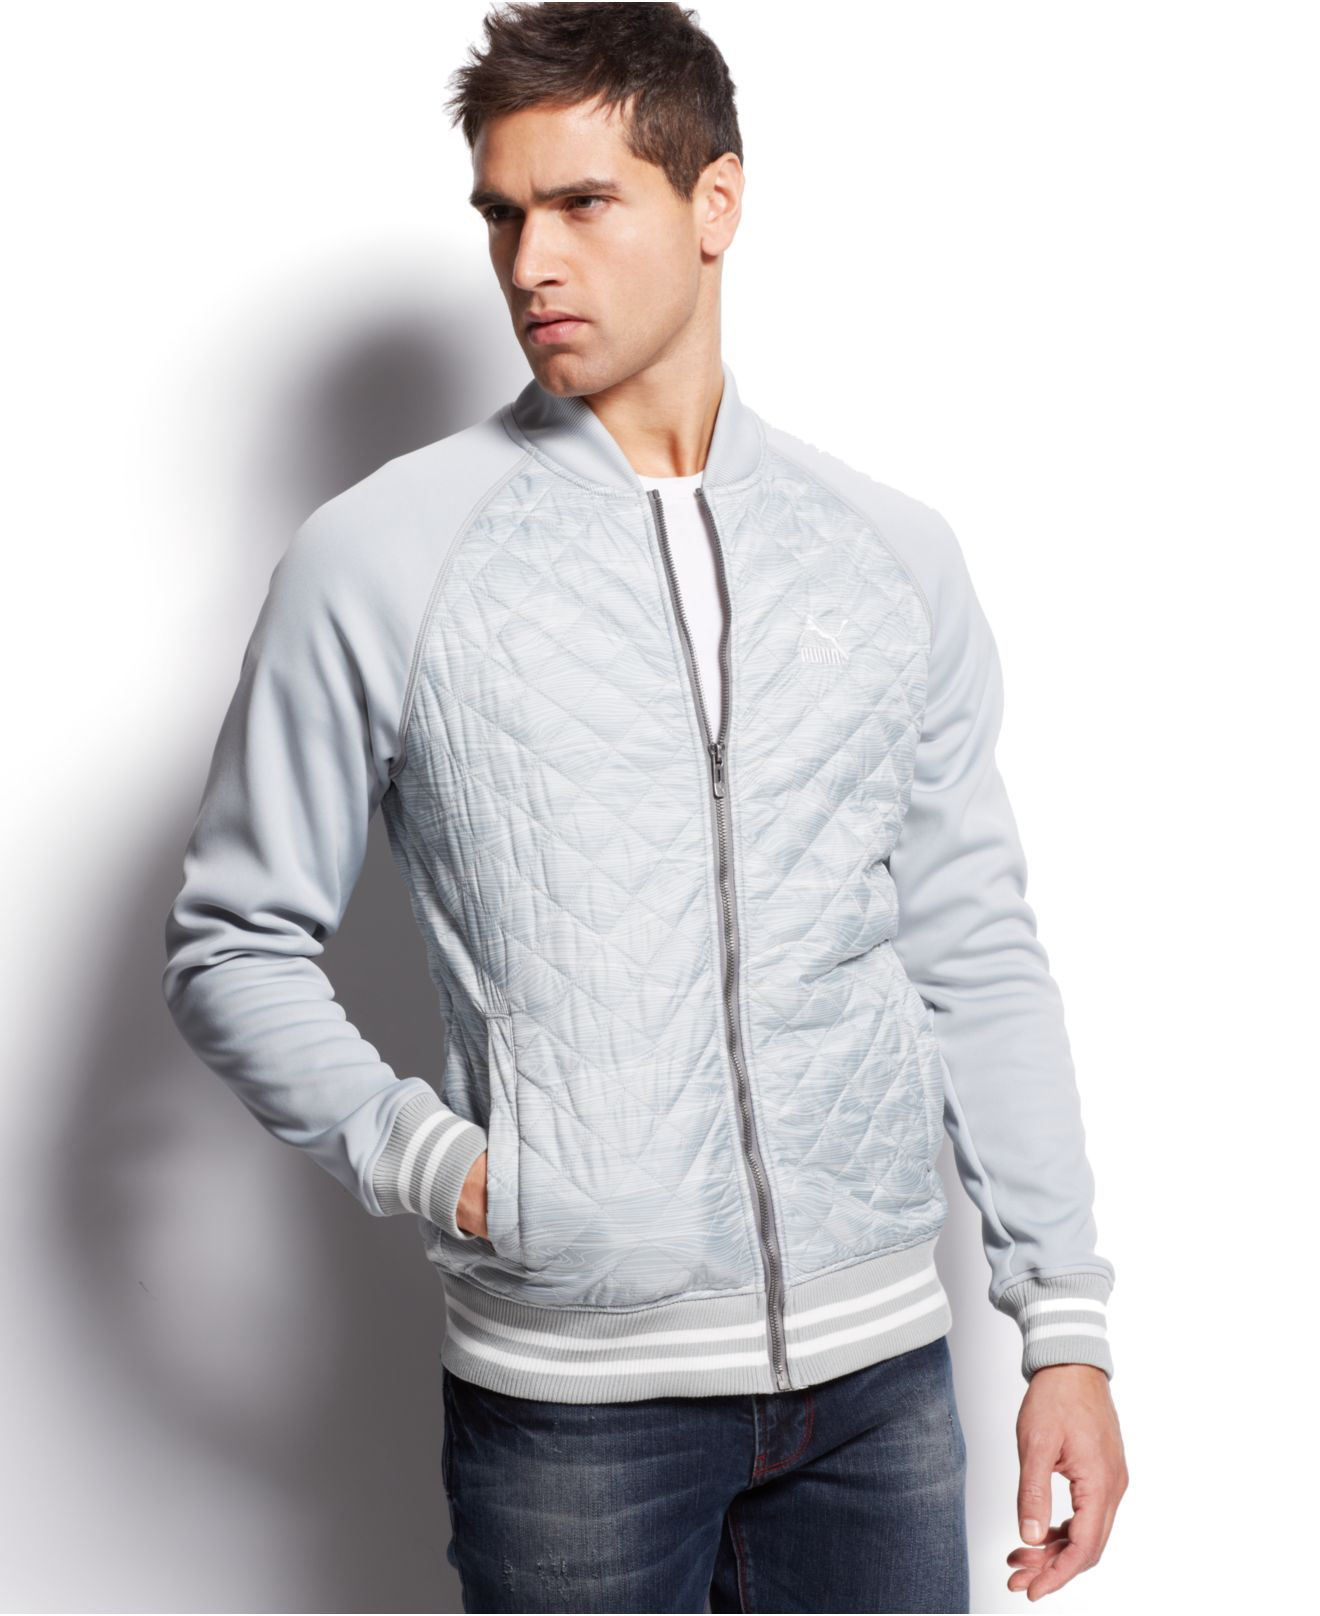 mens puma quilted jacket